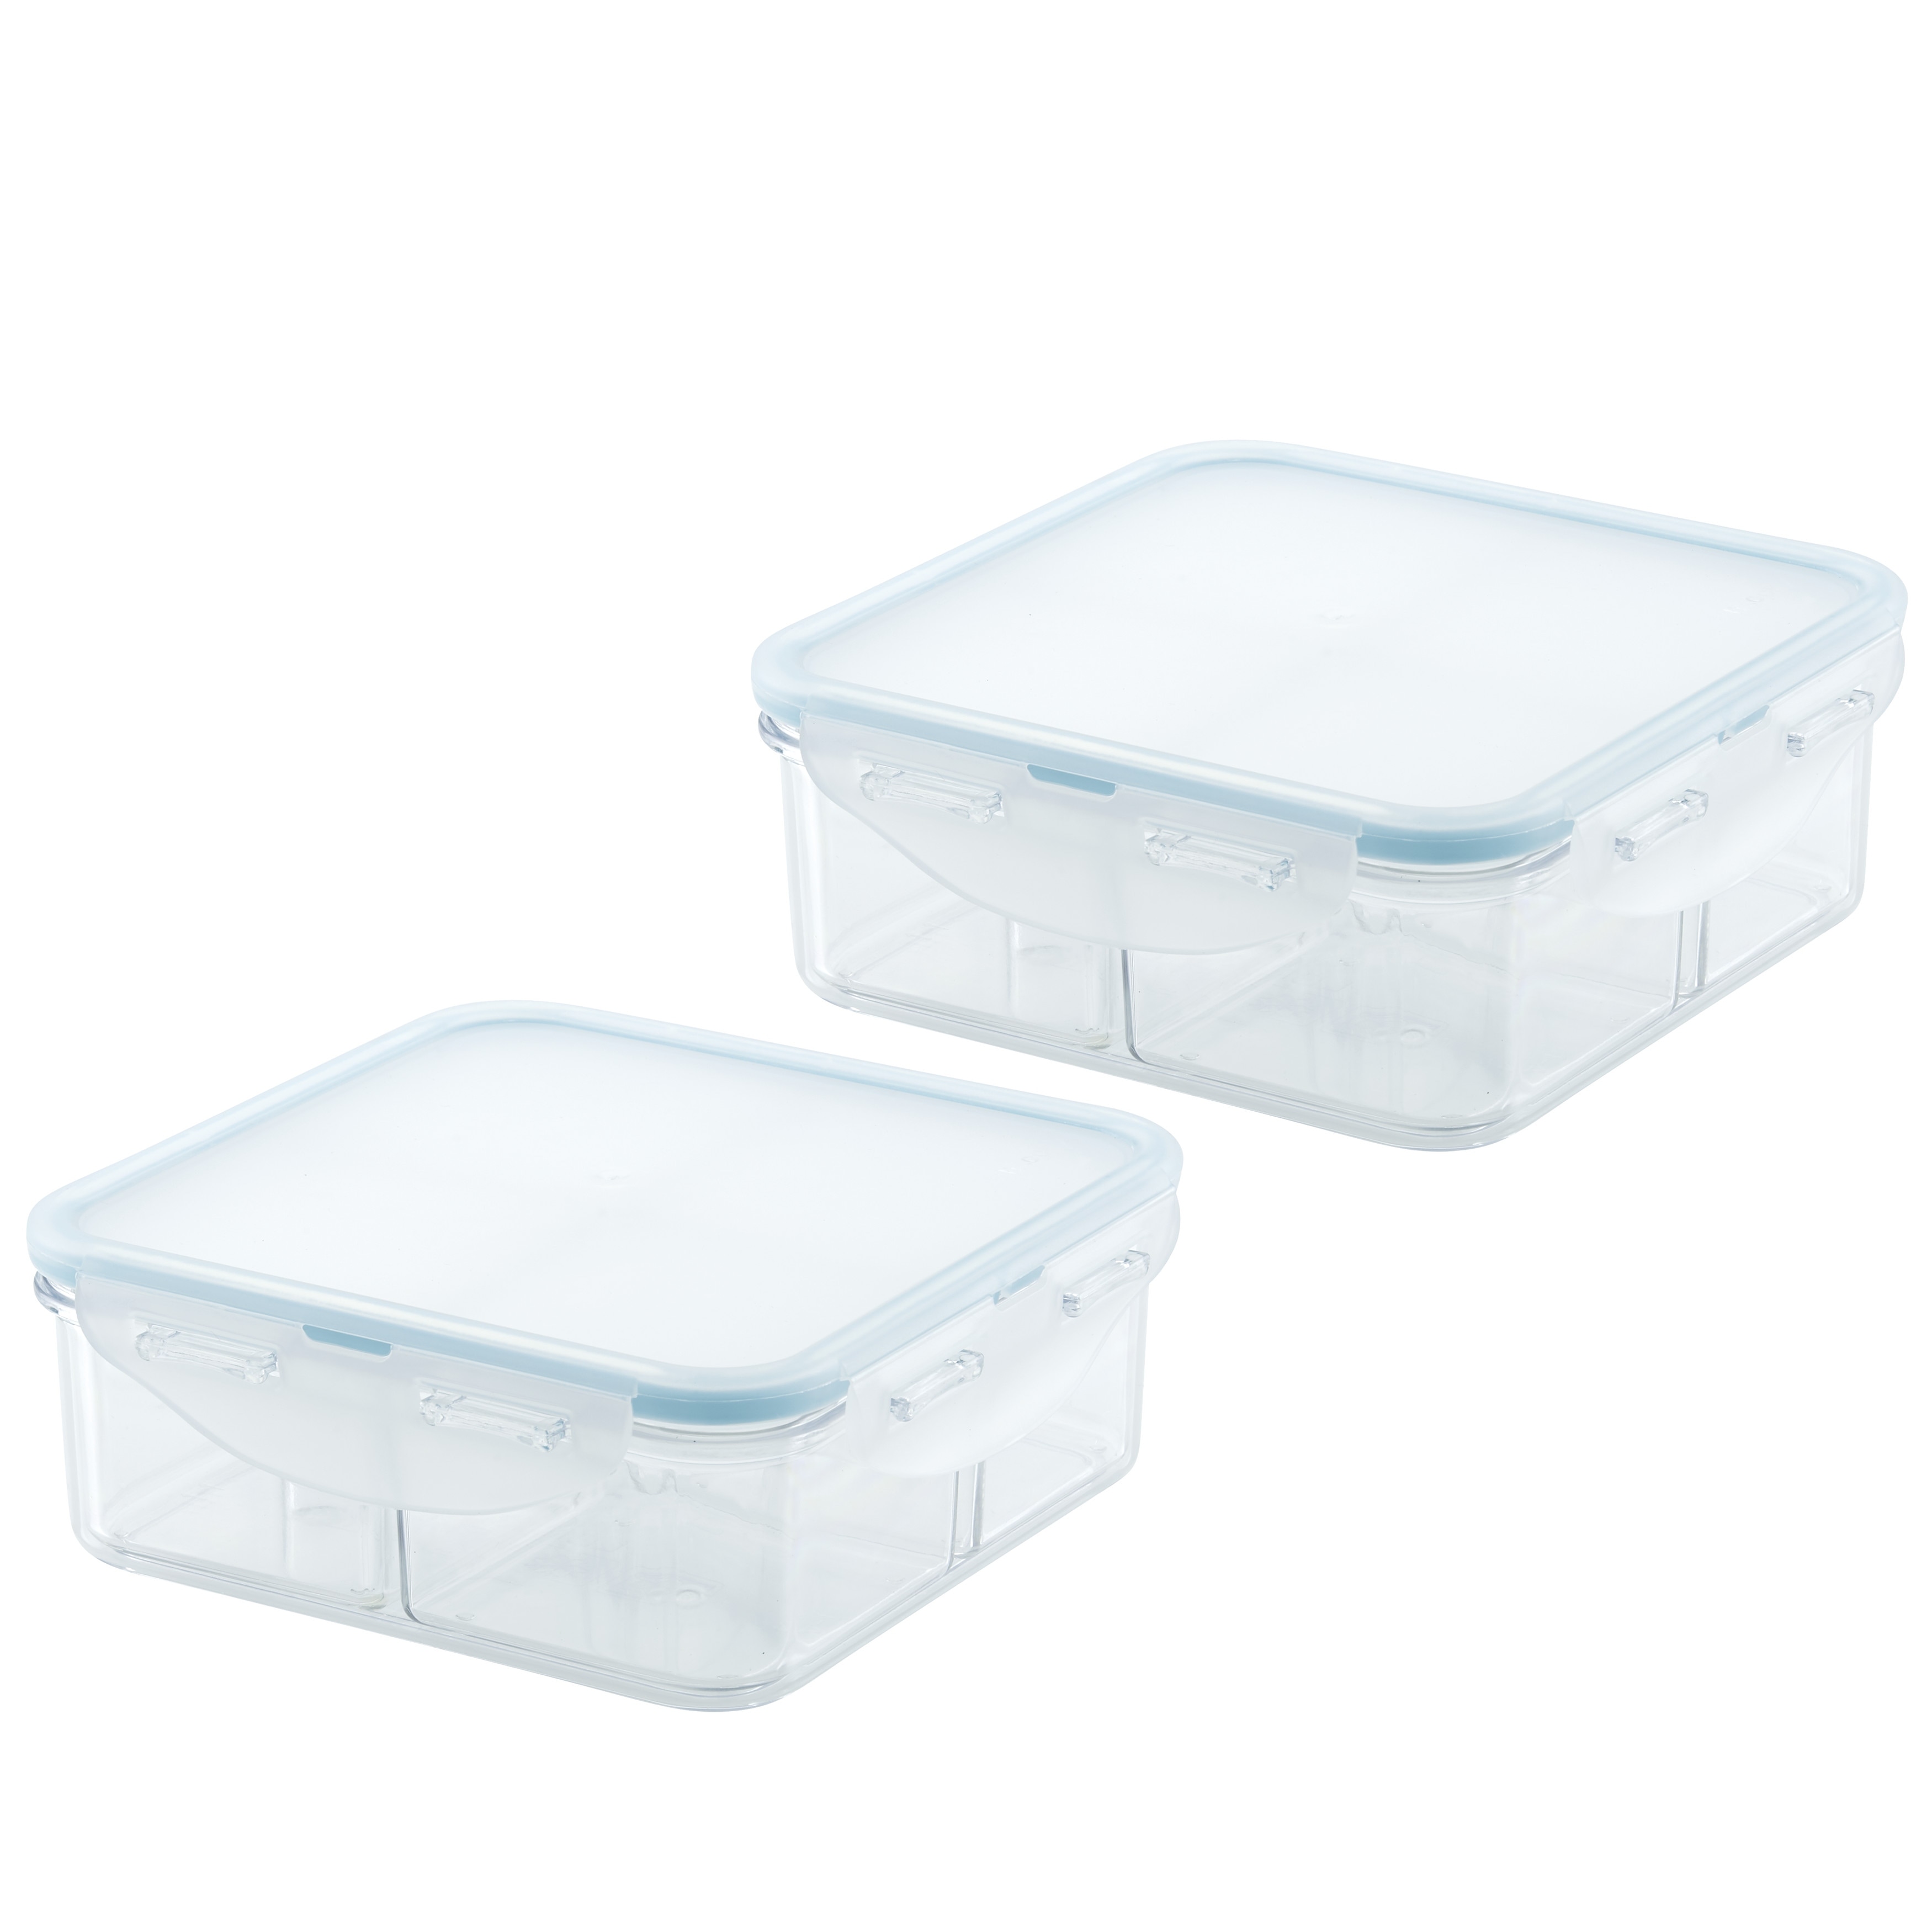 https://ak1.ostkcdn.com/images/products/is/images/direct/3df4e727e8f2eaf3bc0c690d8eb844b4077da174/LocknLock-Purely-Better-Square-Food-Storage-Containers-with-Dividers%2C-29-Ounce%2C-Set-of-2.jpg